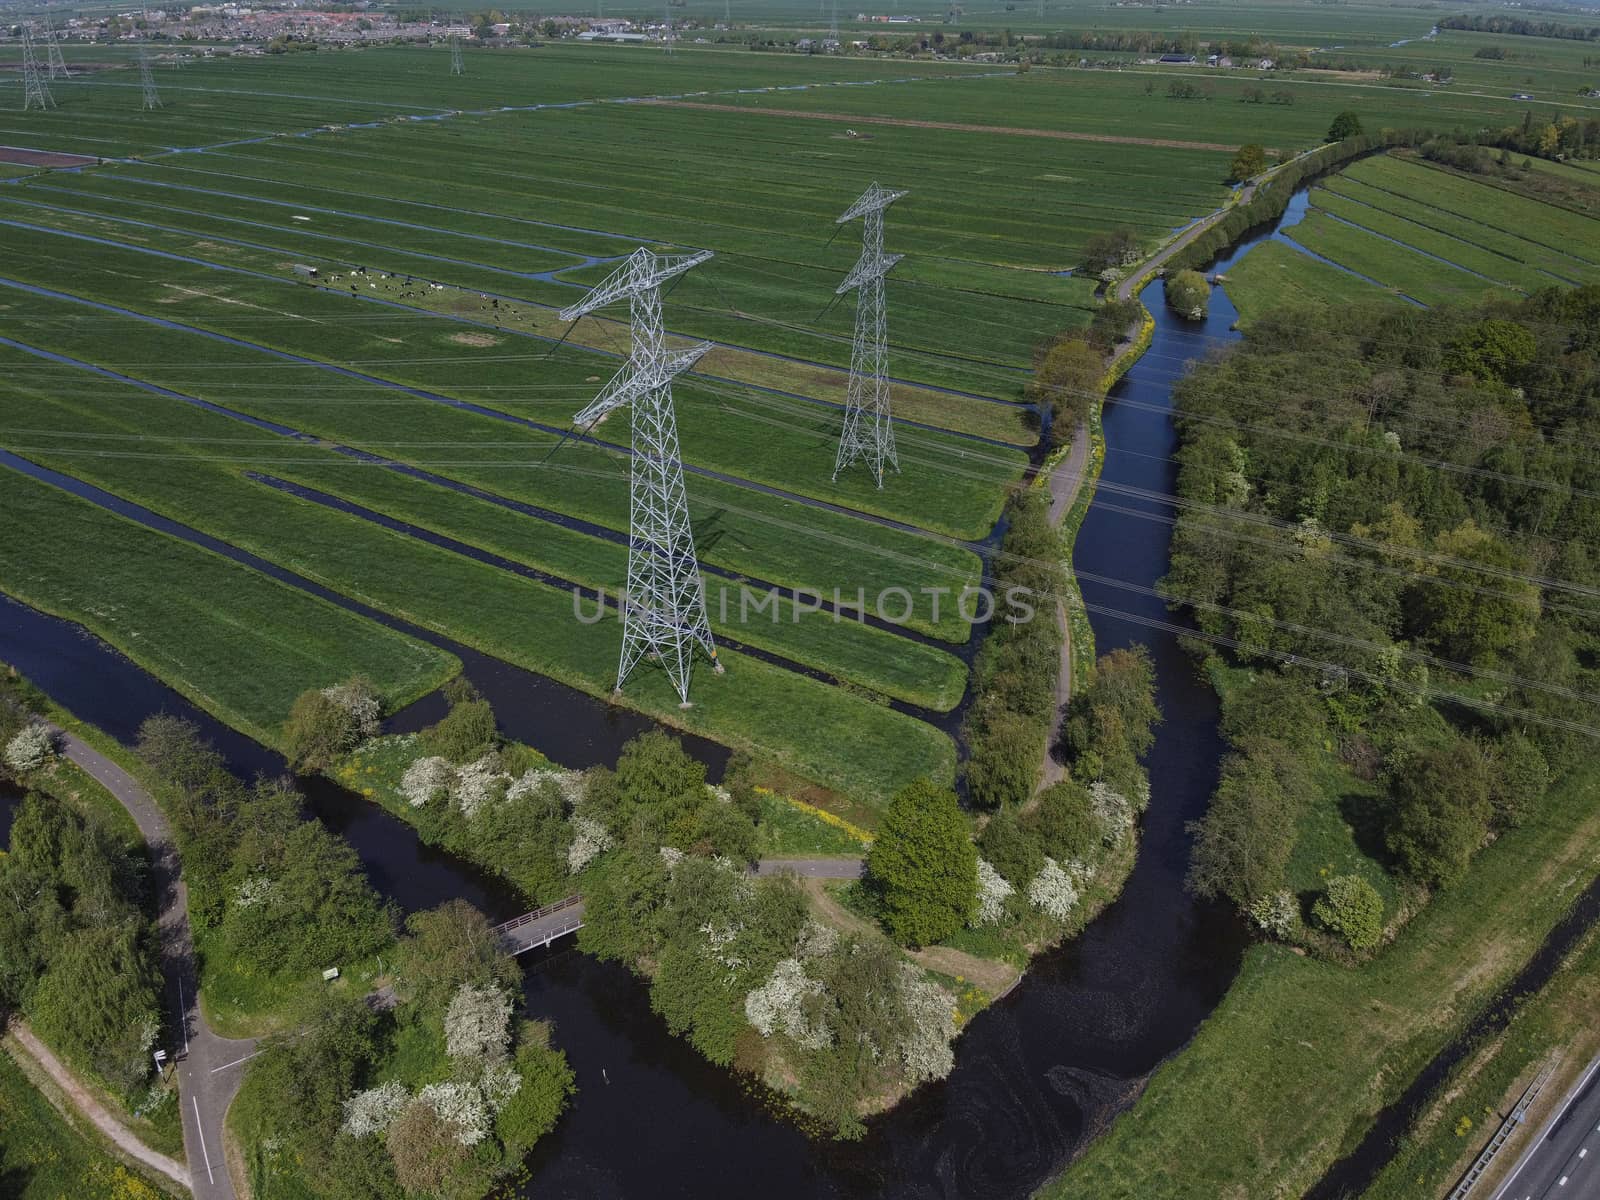 Electrical Transmission Towers the netherlands by Tjeerdkruse